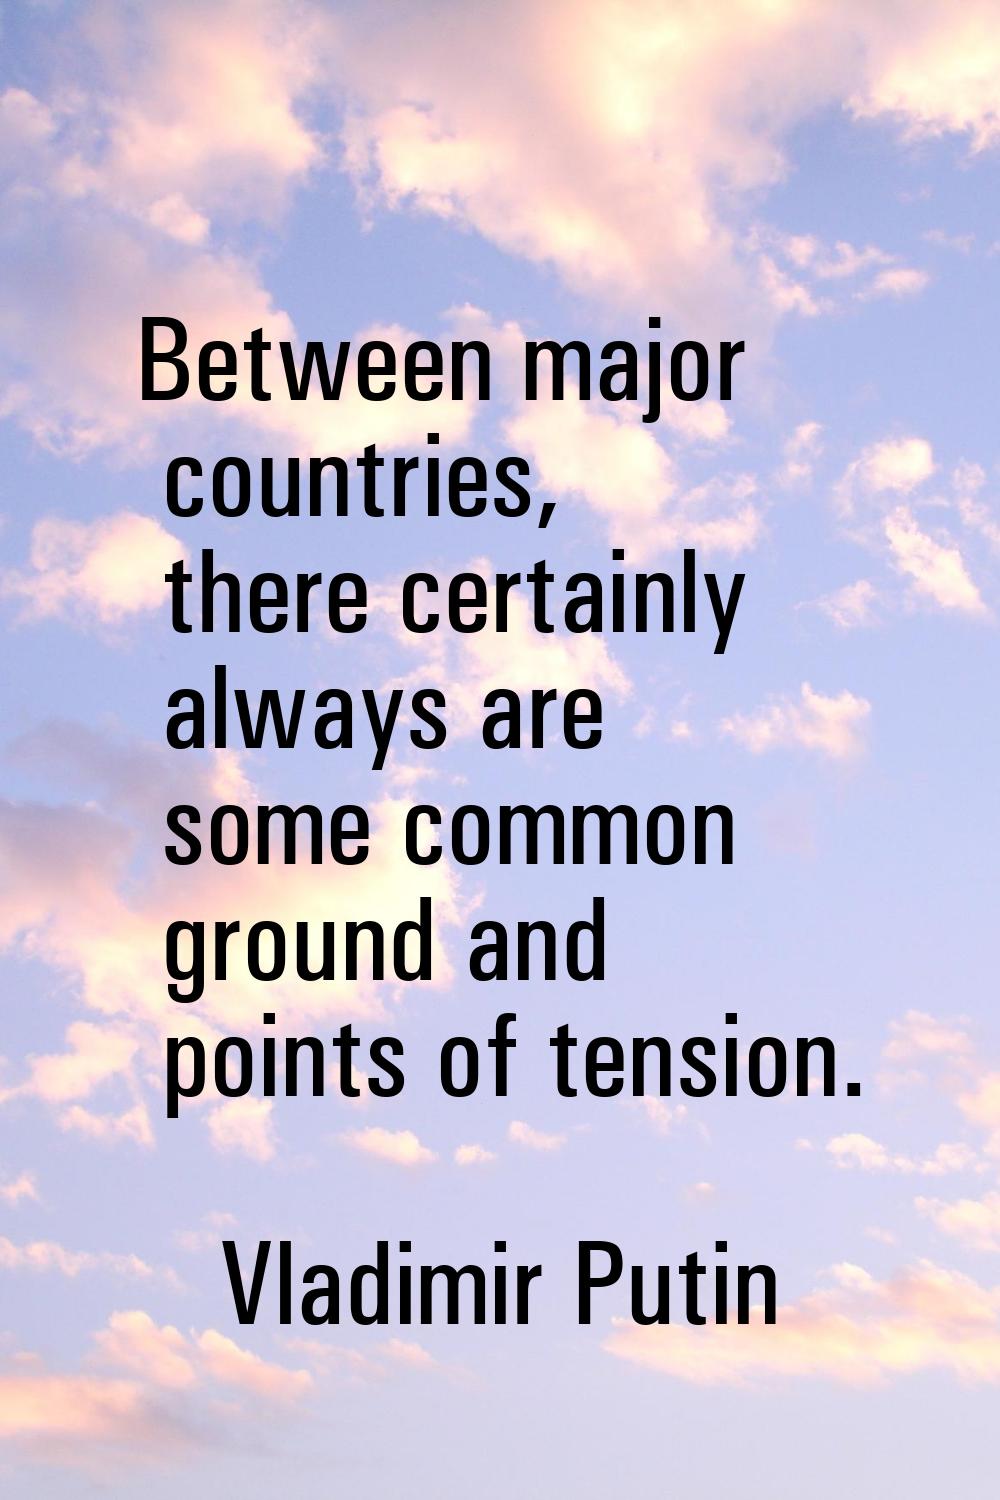 Between major countries, there certainly always are some common ground and points of tension.